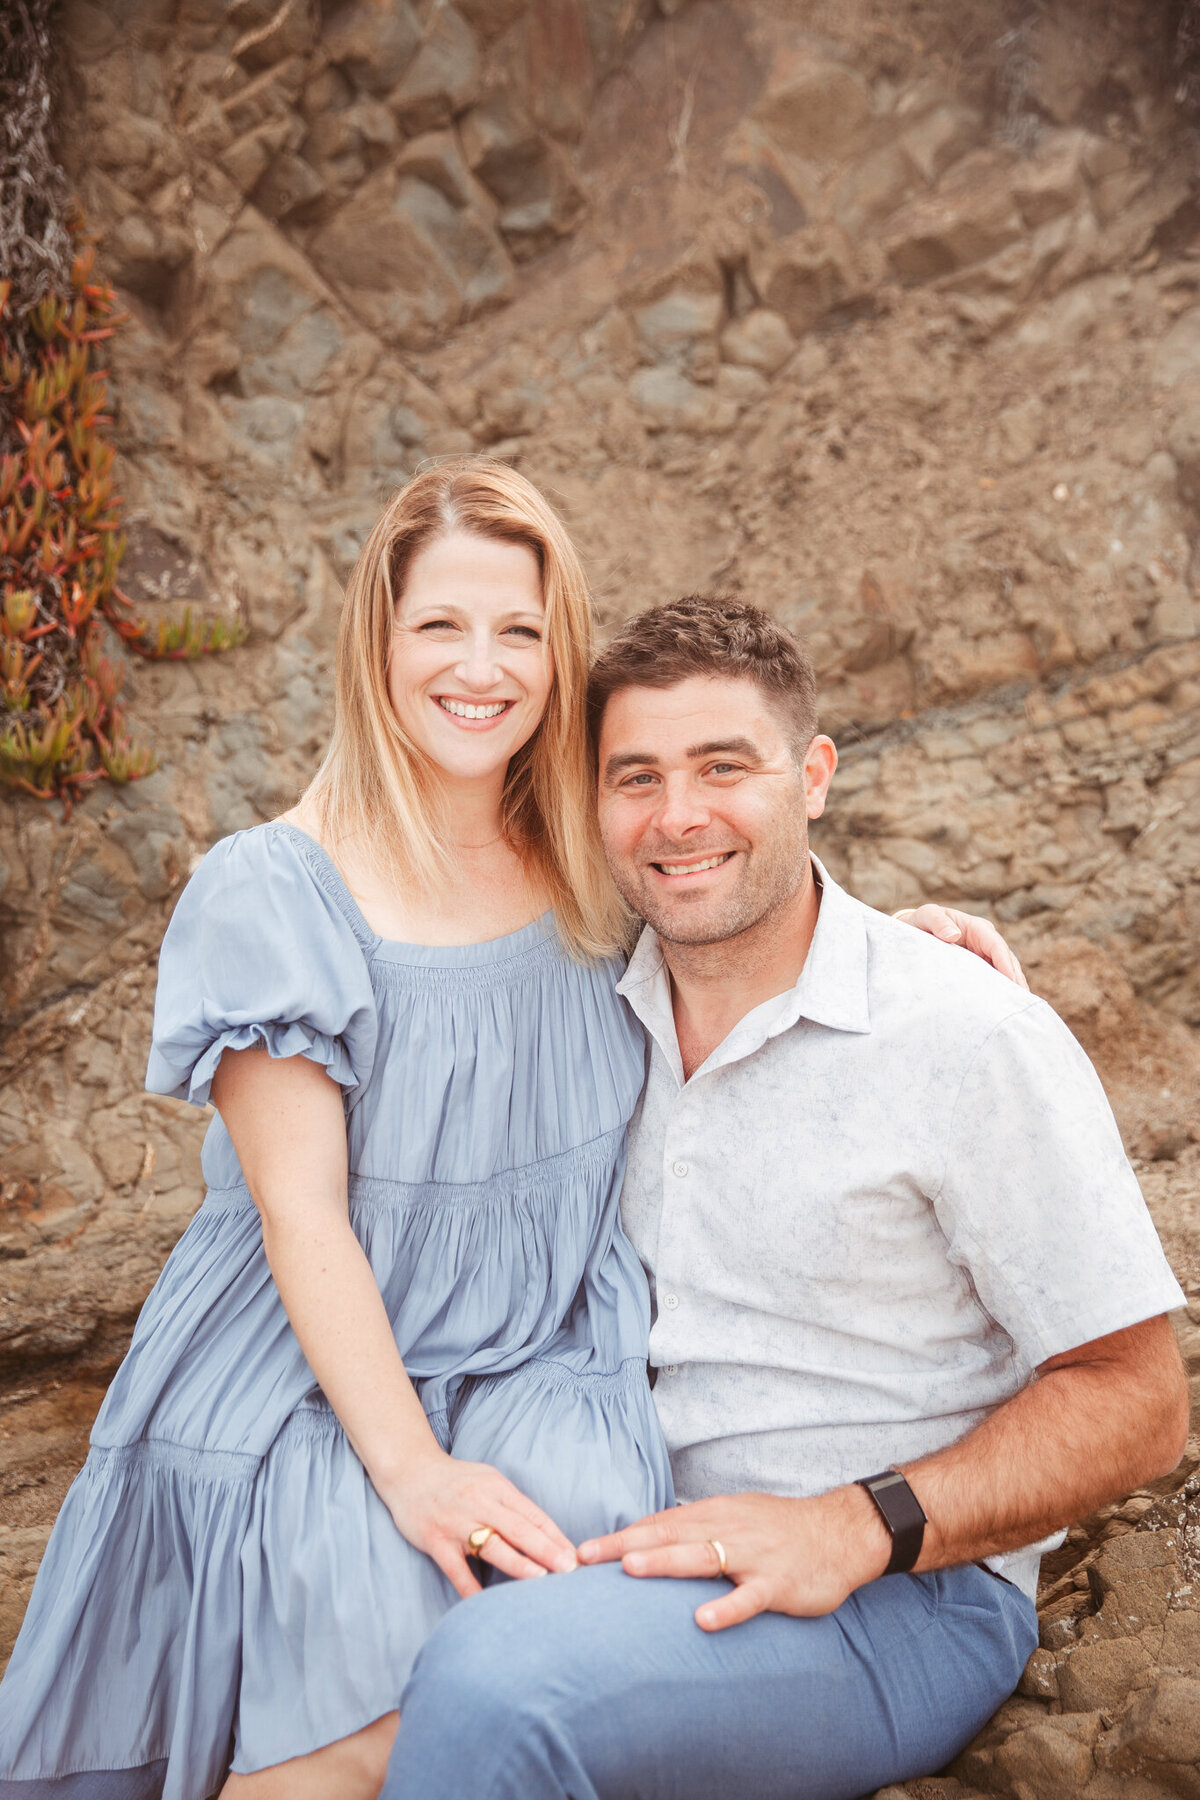 Luke and Leigh Huther-Flytographer-10 Year Anniversary-Baker Beach-San Francisco-Emily Pillon Photography-S-051222-19